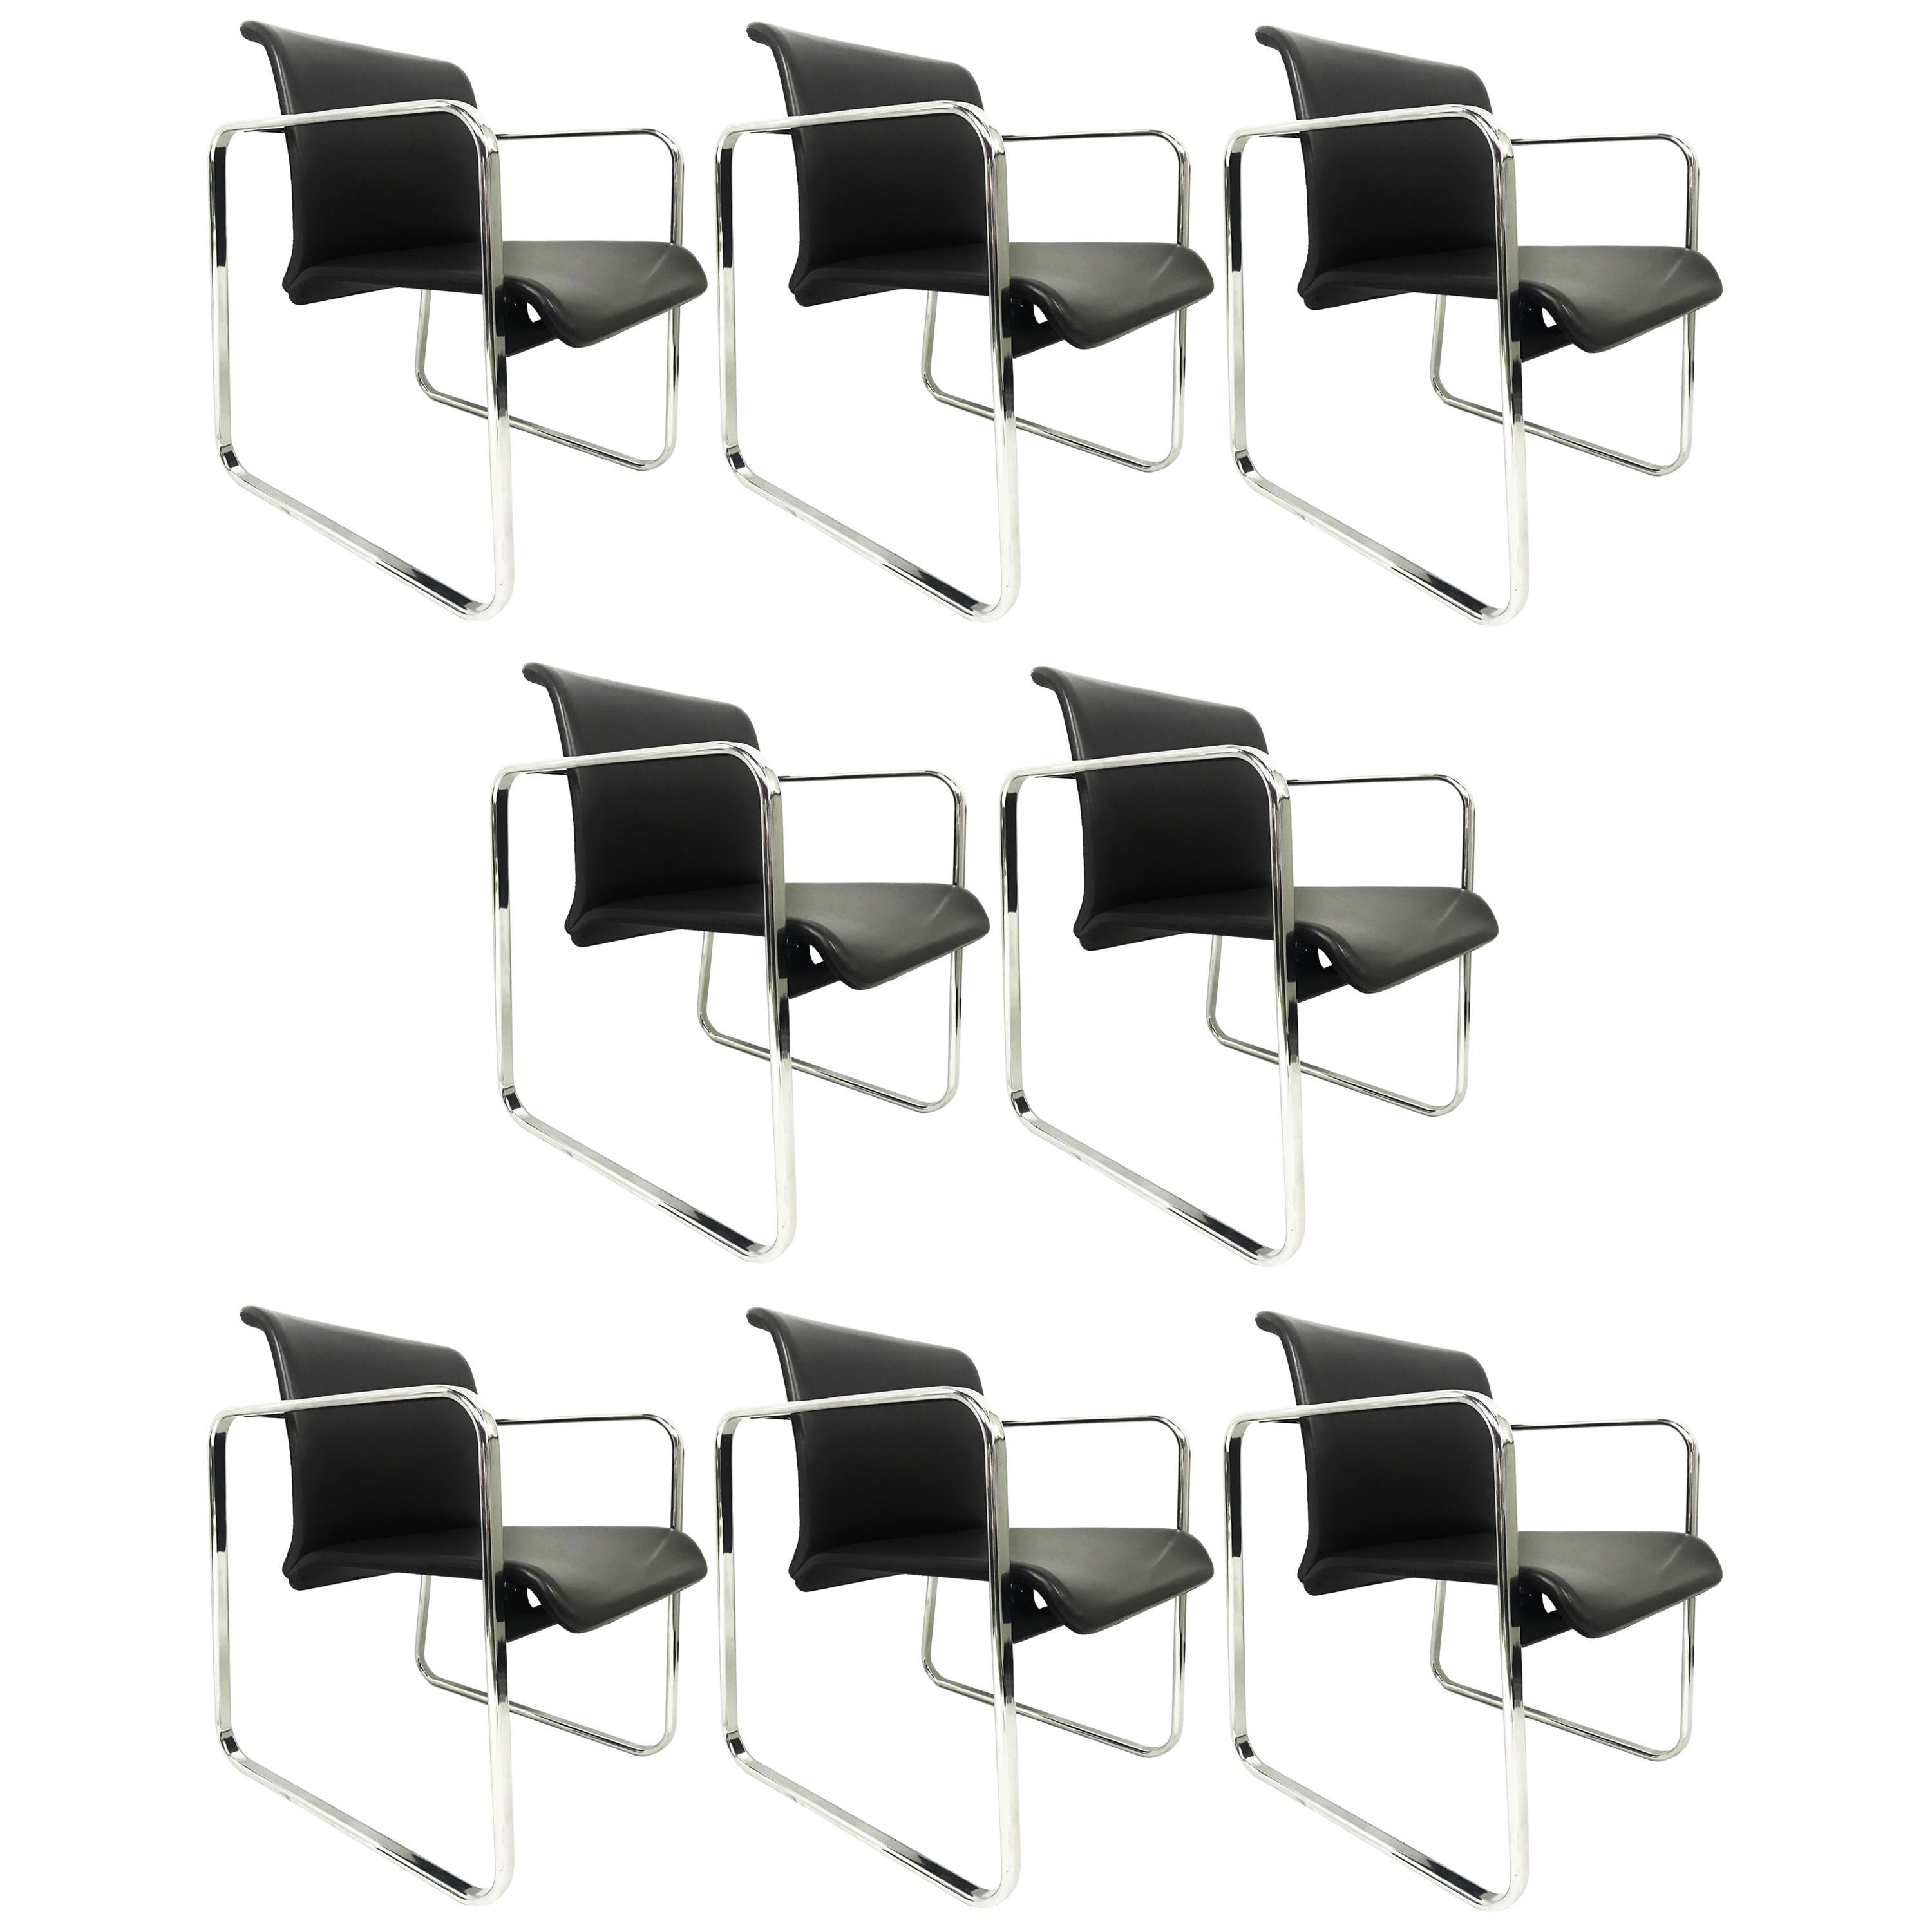 Eight Black Armchairs Designed by Peter Protzman and Alexander Girard for Herman